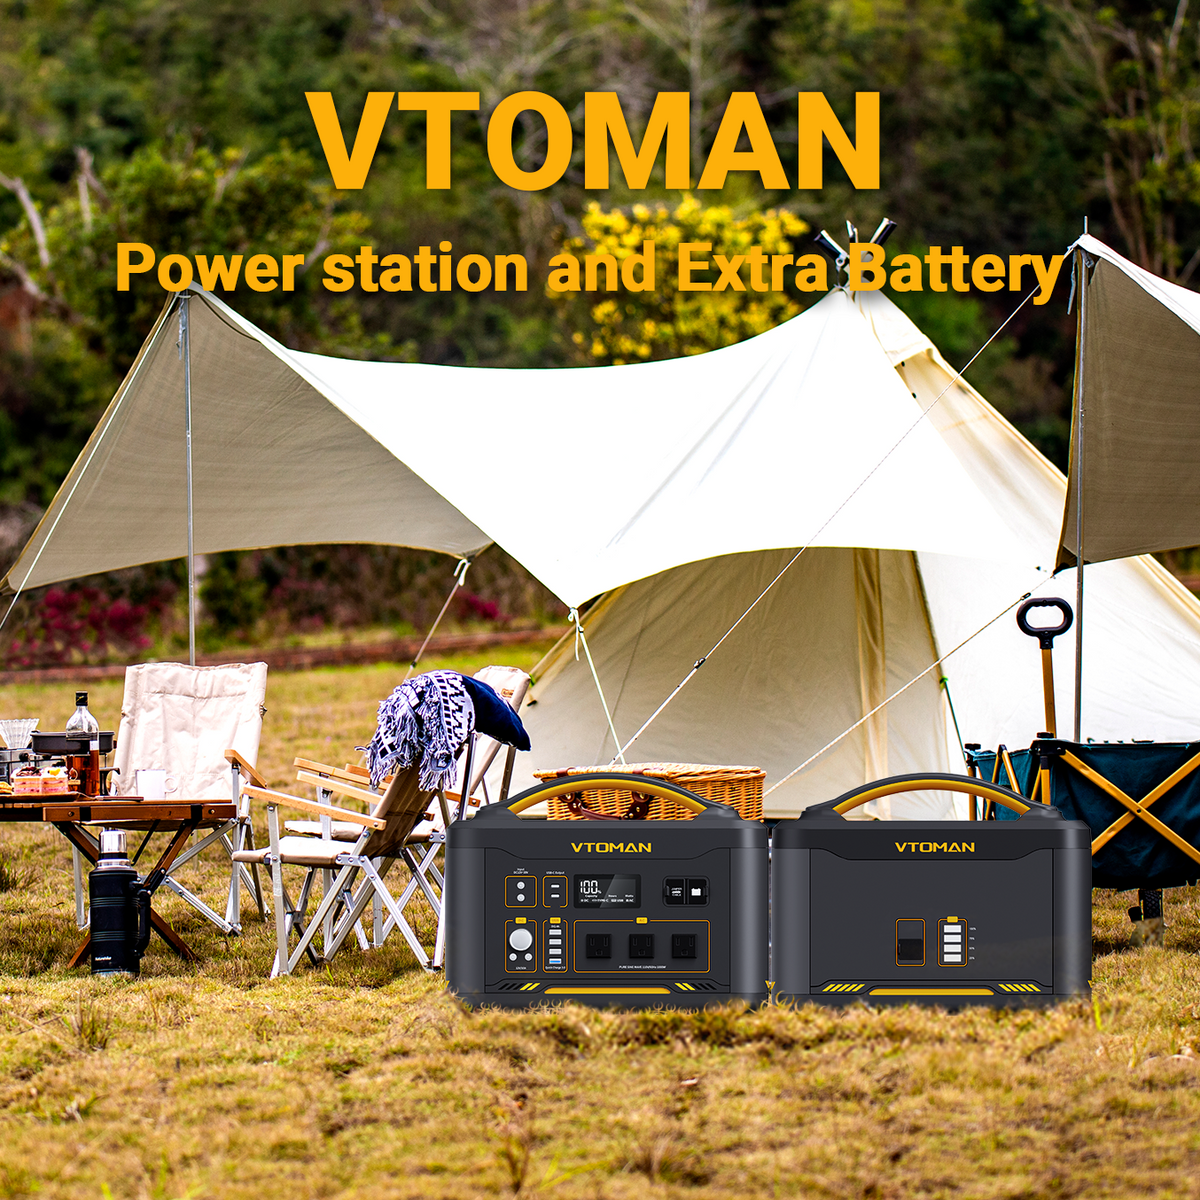 The extra battery for Vtoman Solar Generator is a re-expandable battery pack